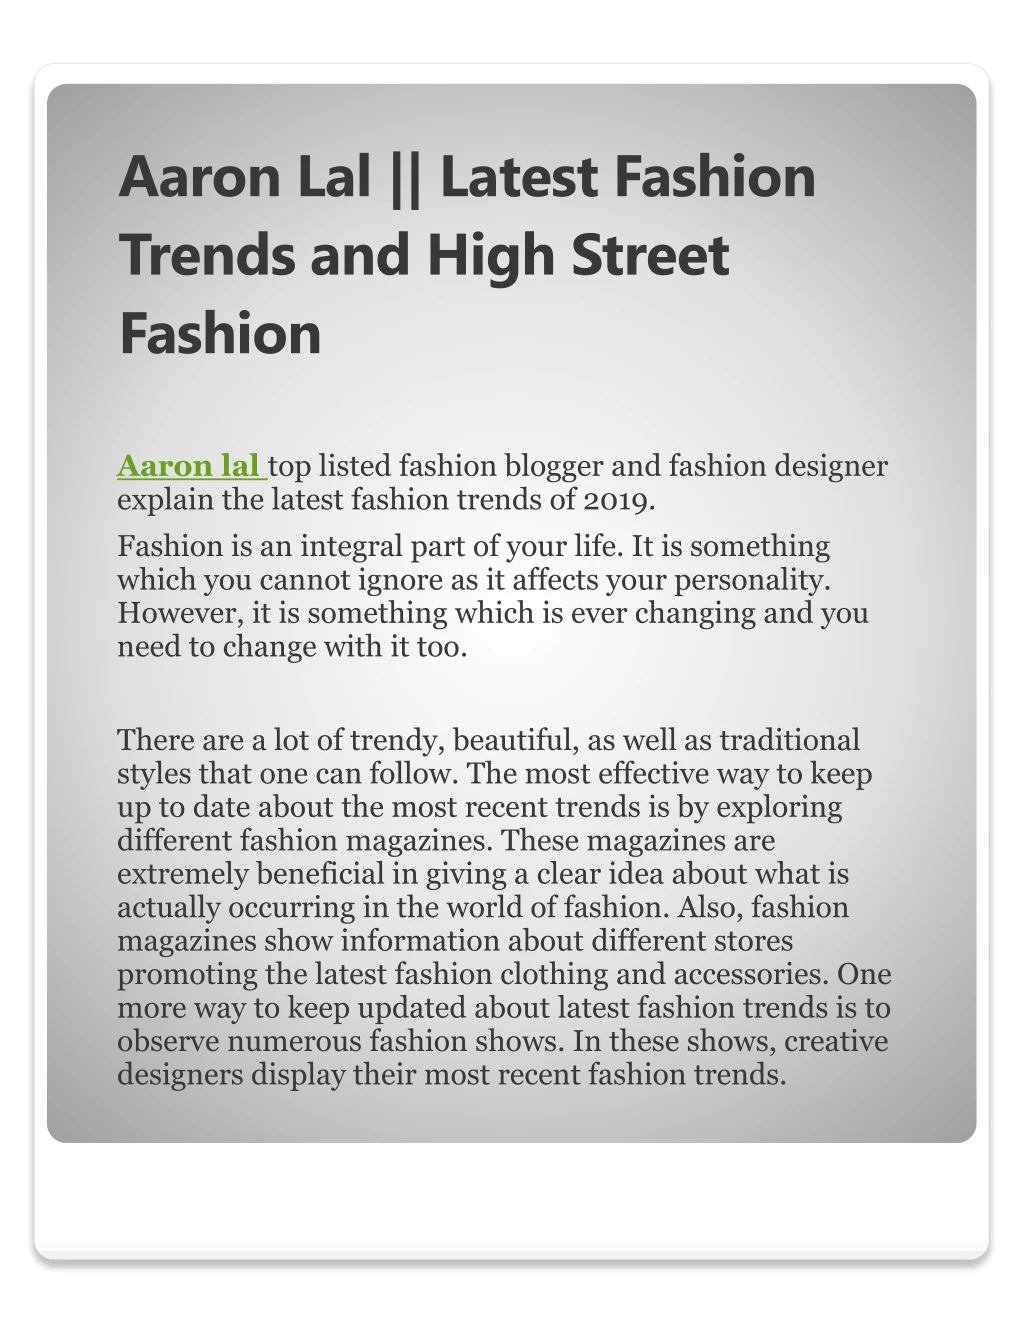 aaron lal latest fashion trends and high street